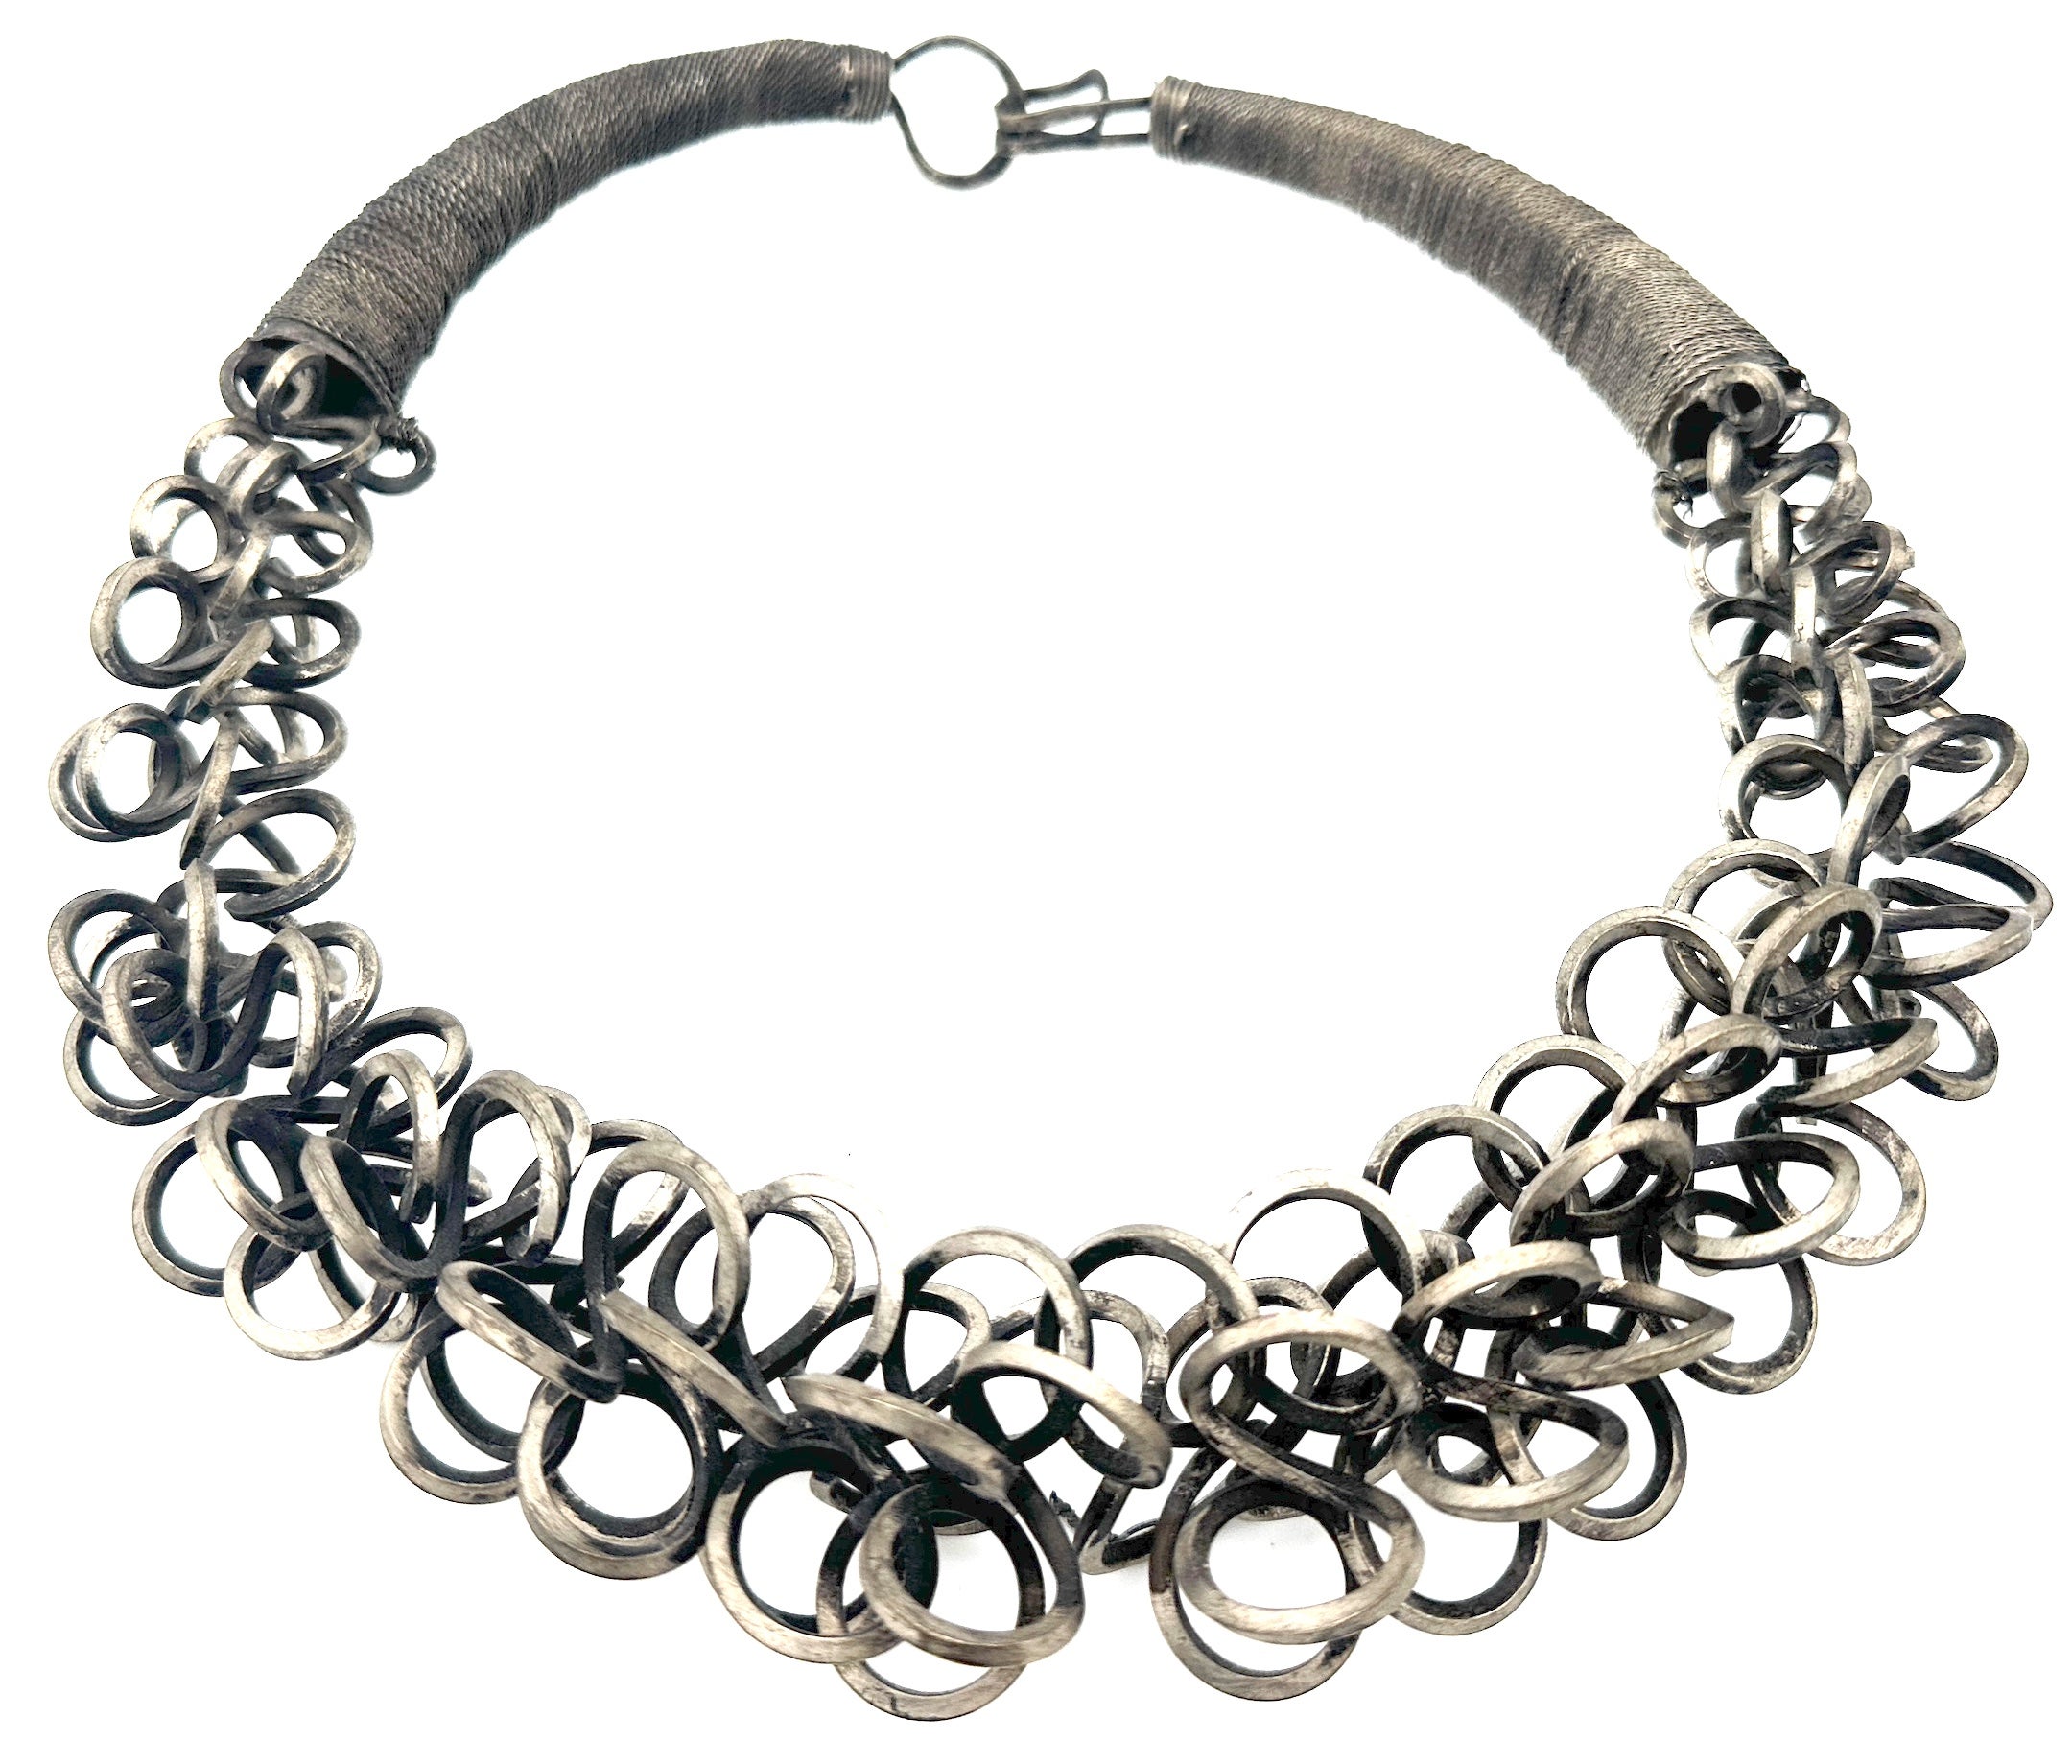 Miao Tribe Interlaced & Massed Rings Silver Pectoral Necklace
Miao Tribe, Northern Vietnam, Laos & Southwest China, Mid 20th Century  

An exquisite Miao Tribe Interlaced & Massed Rings Silver Pectoral Necklace, originating from Northern Vietnam,